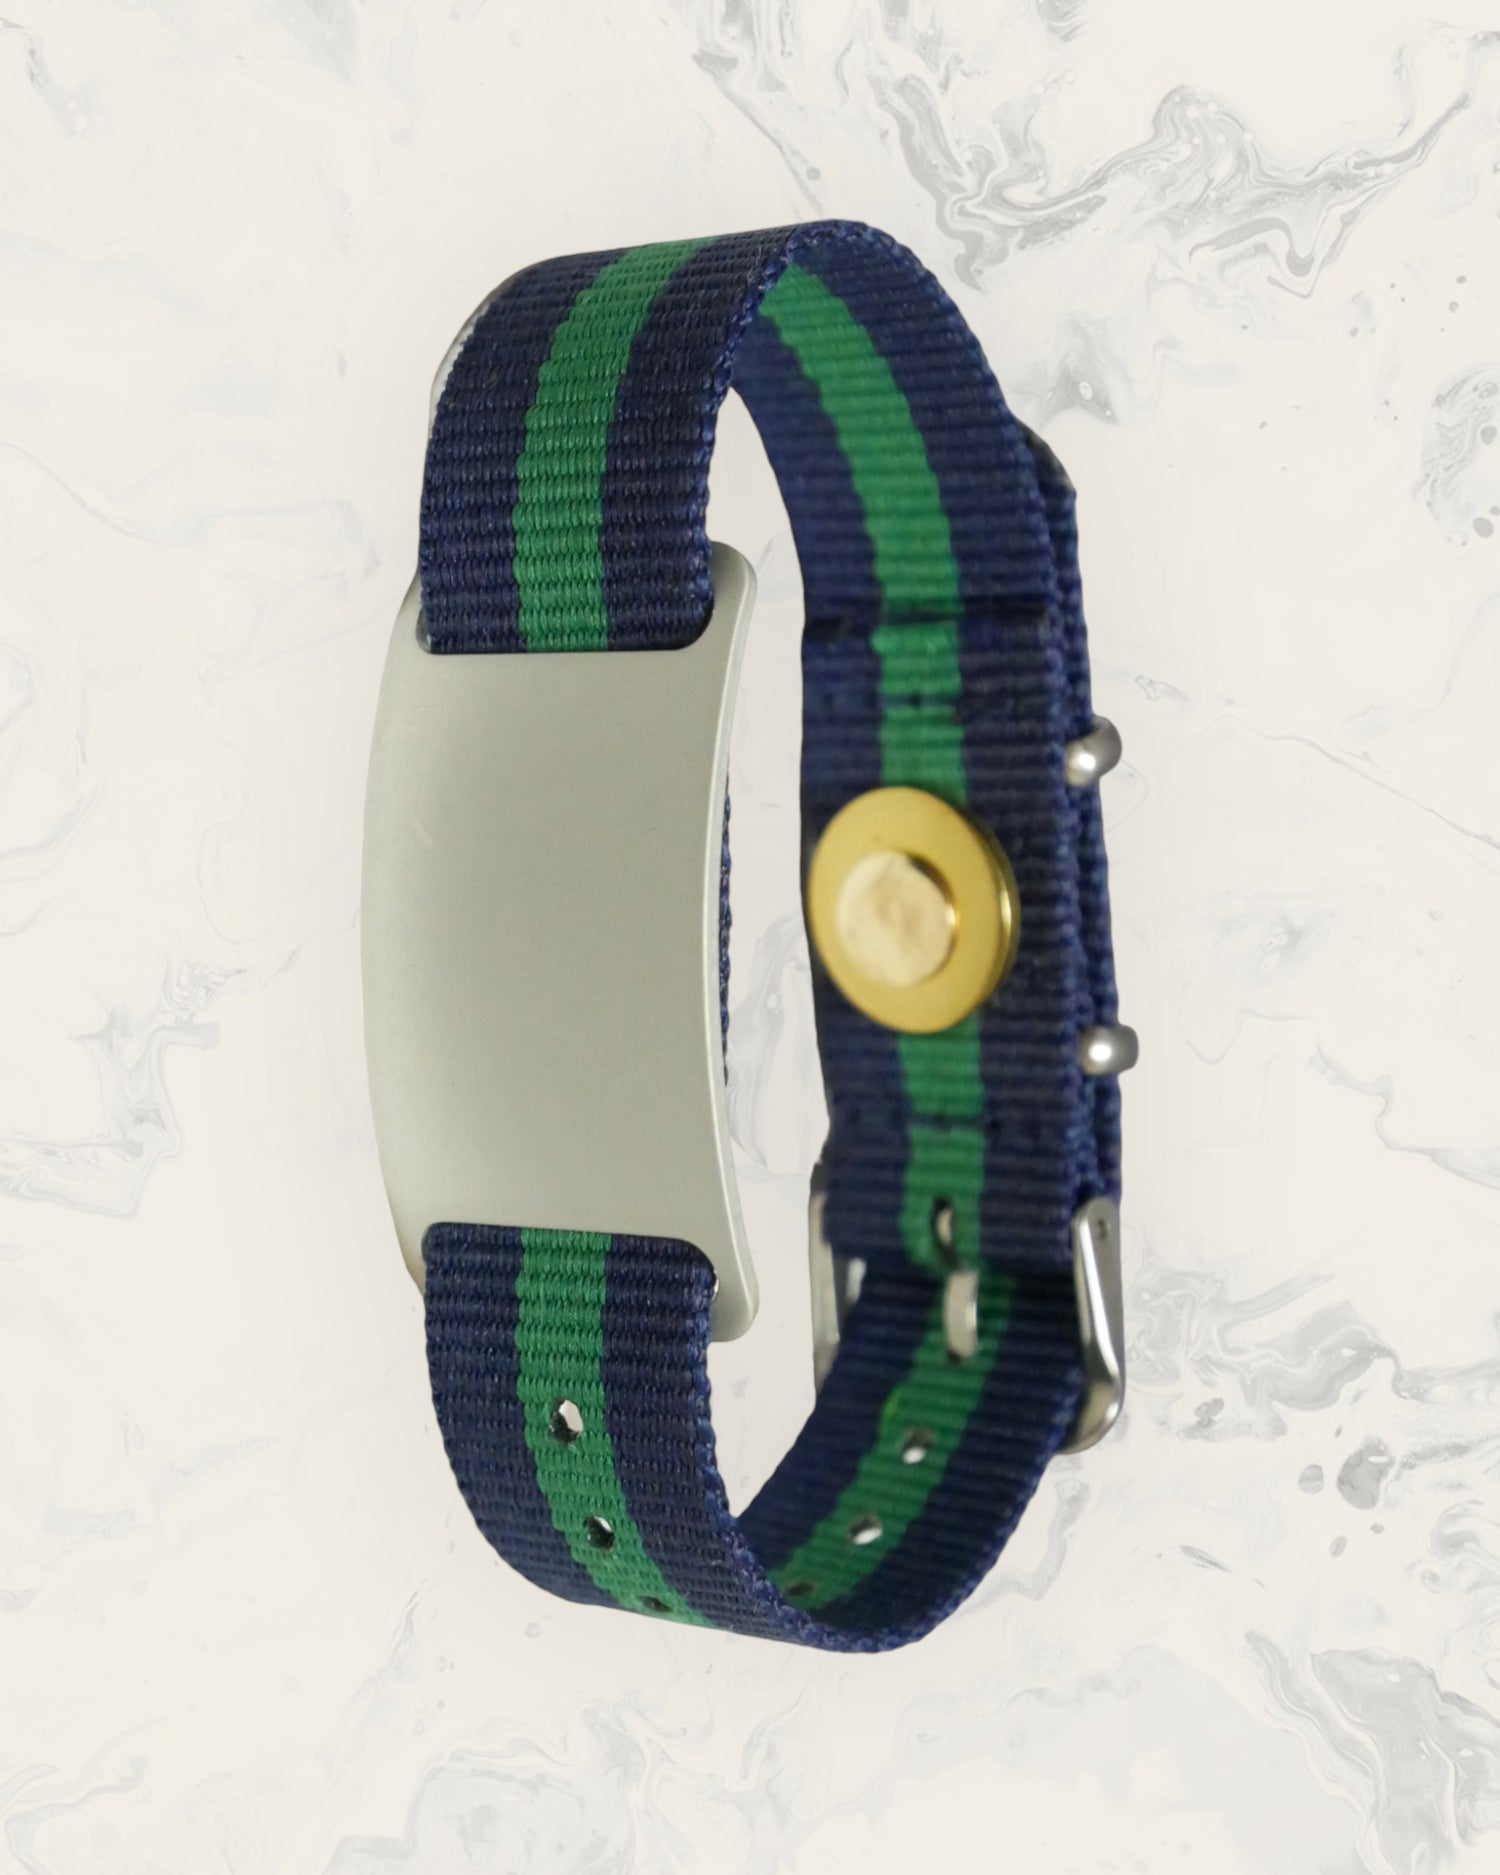 Natural Pain Relief and EMF Protection Bracelet Nylon Band Color Navy Blue and Green Striped with a Silver Slider